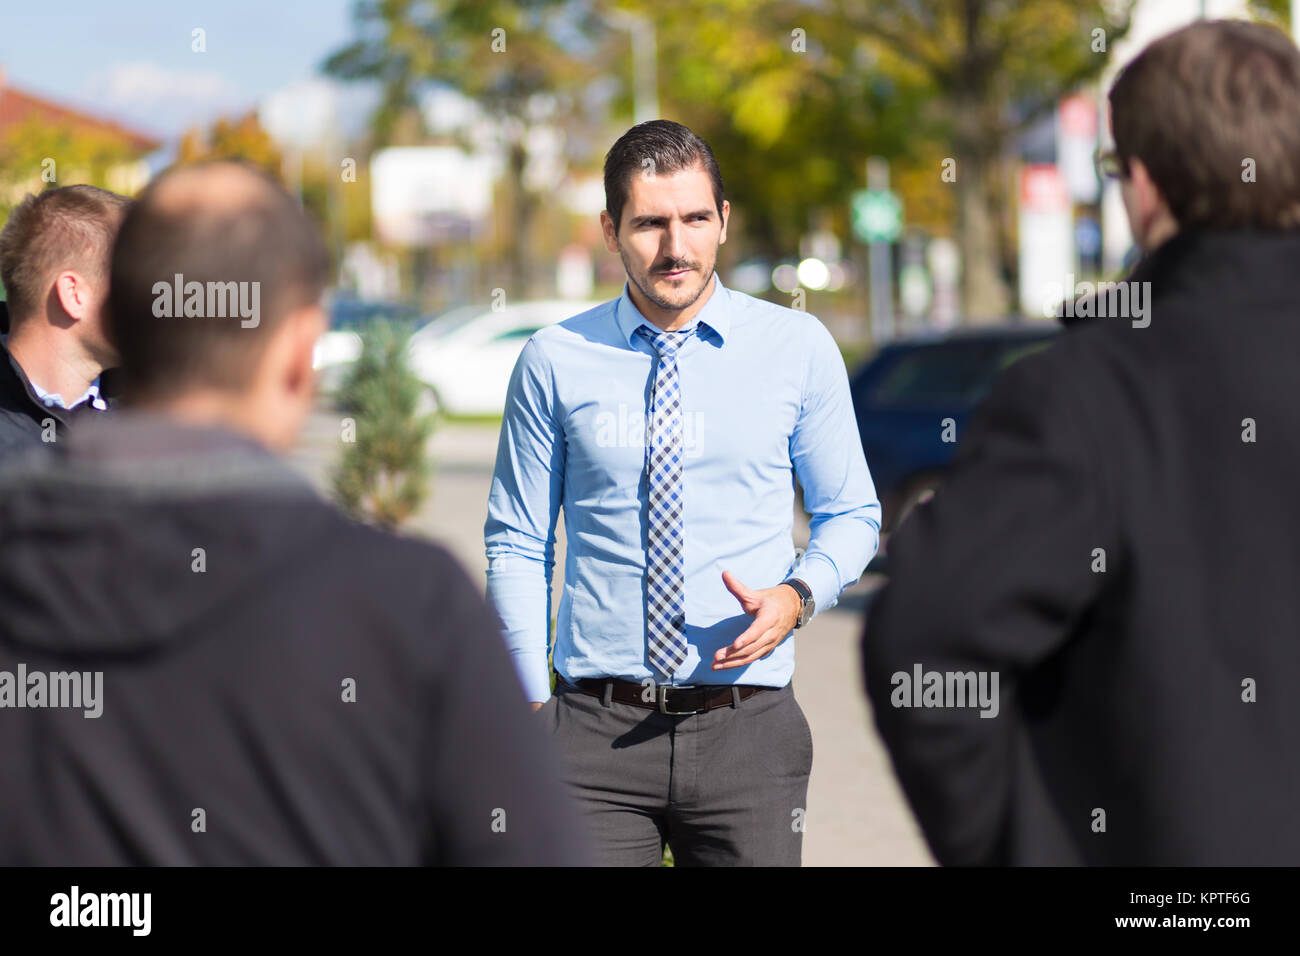 Businessman being approached and blackmailed by racketeers. Stock Photo